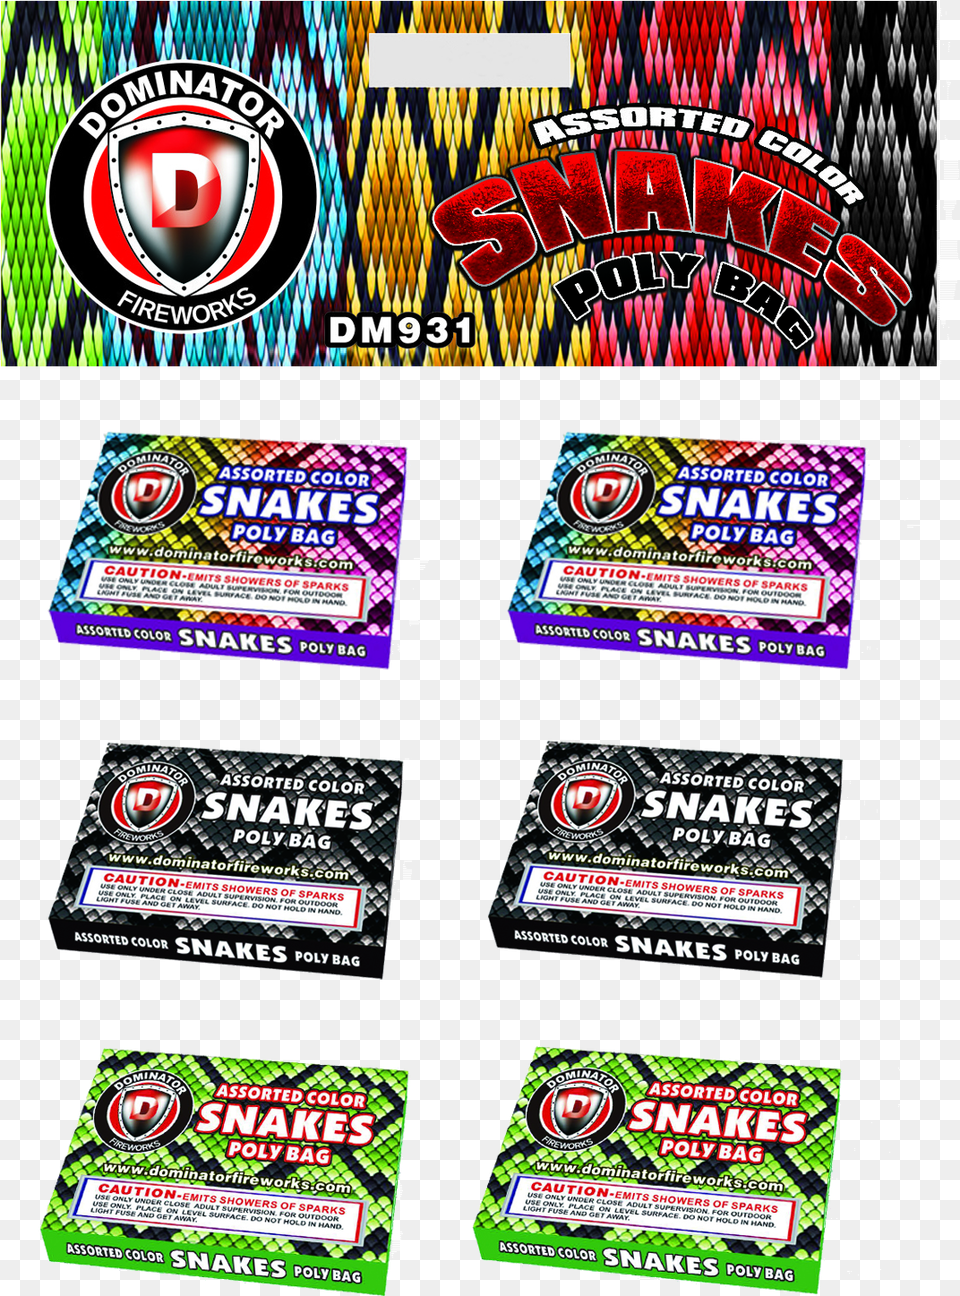 Assorted Color Snakes Safe And Sane Assorted Snakes, Gum, Food, Sweets, Business Card Png